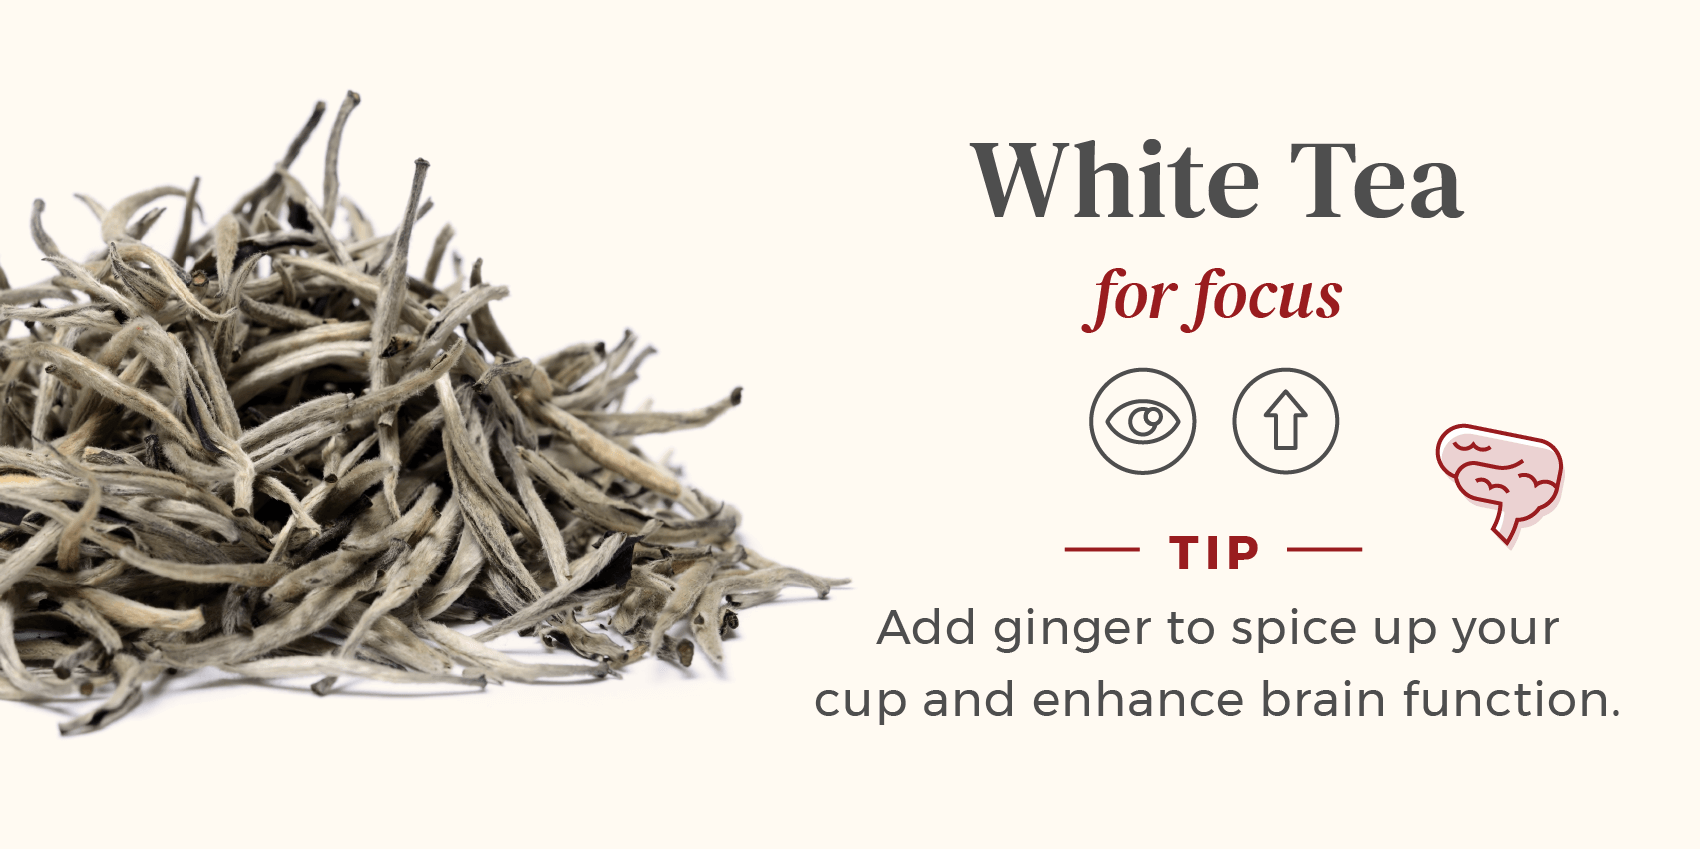 Pile of loose white tea used for focus, add ginger for best effects.